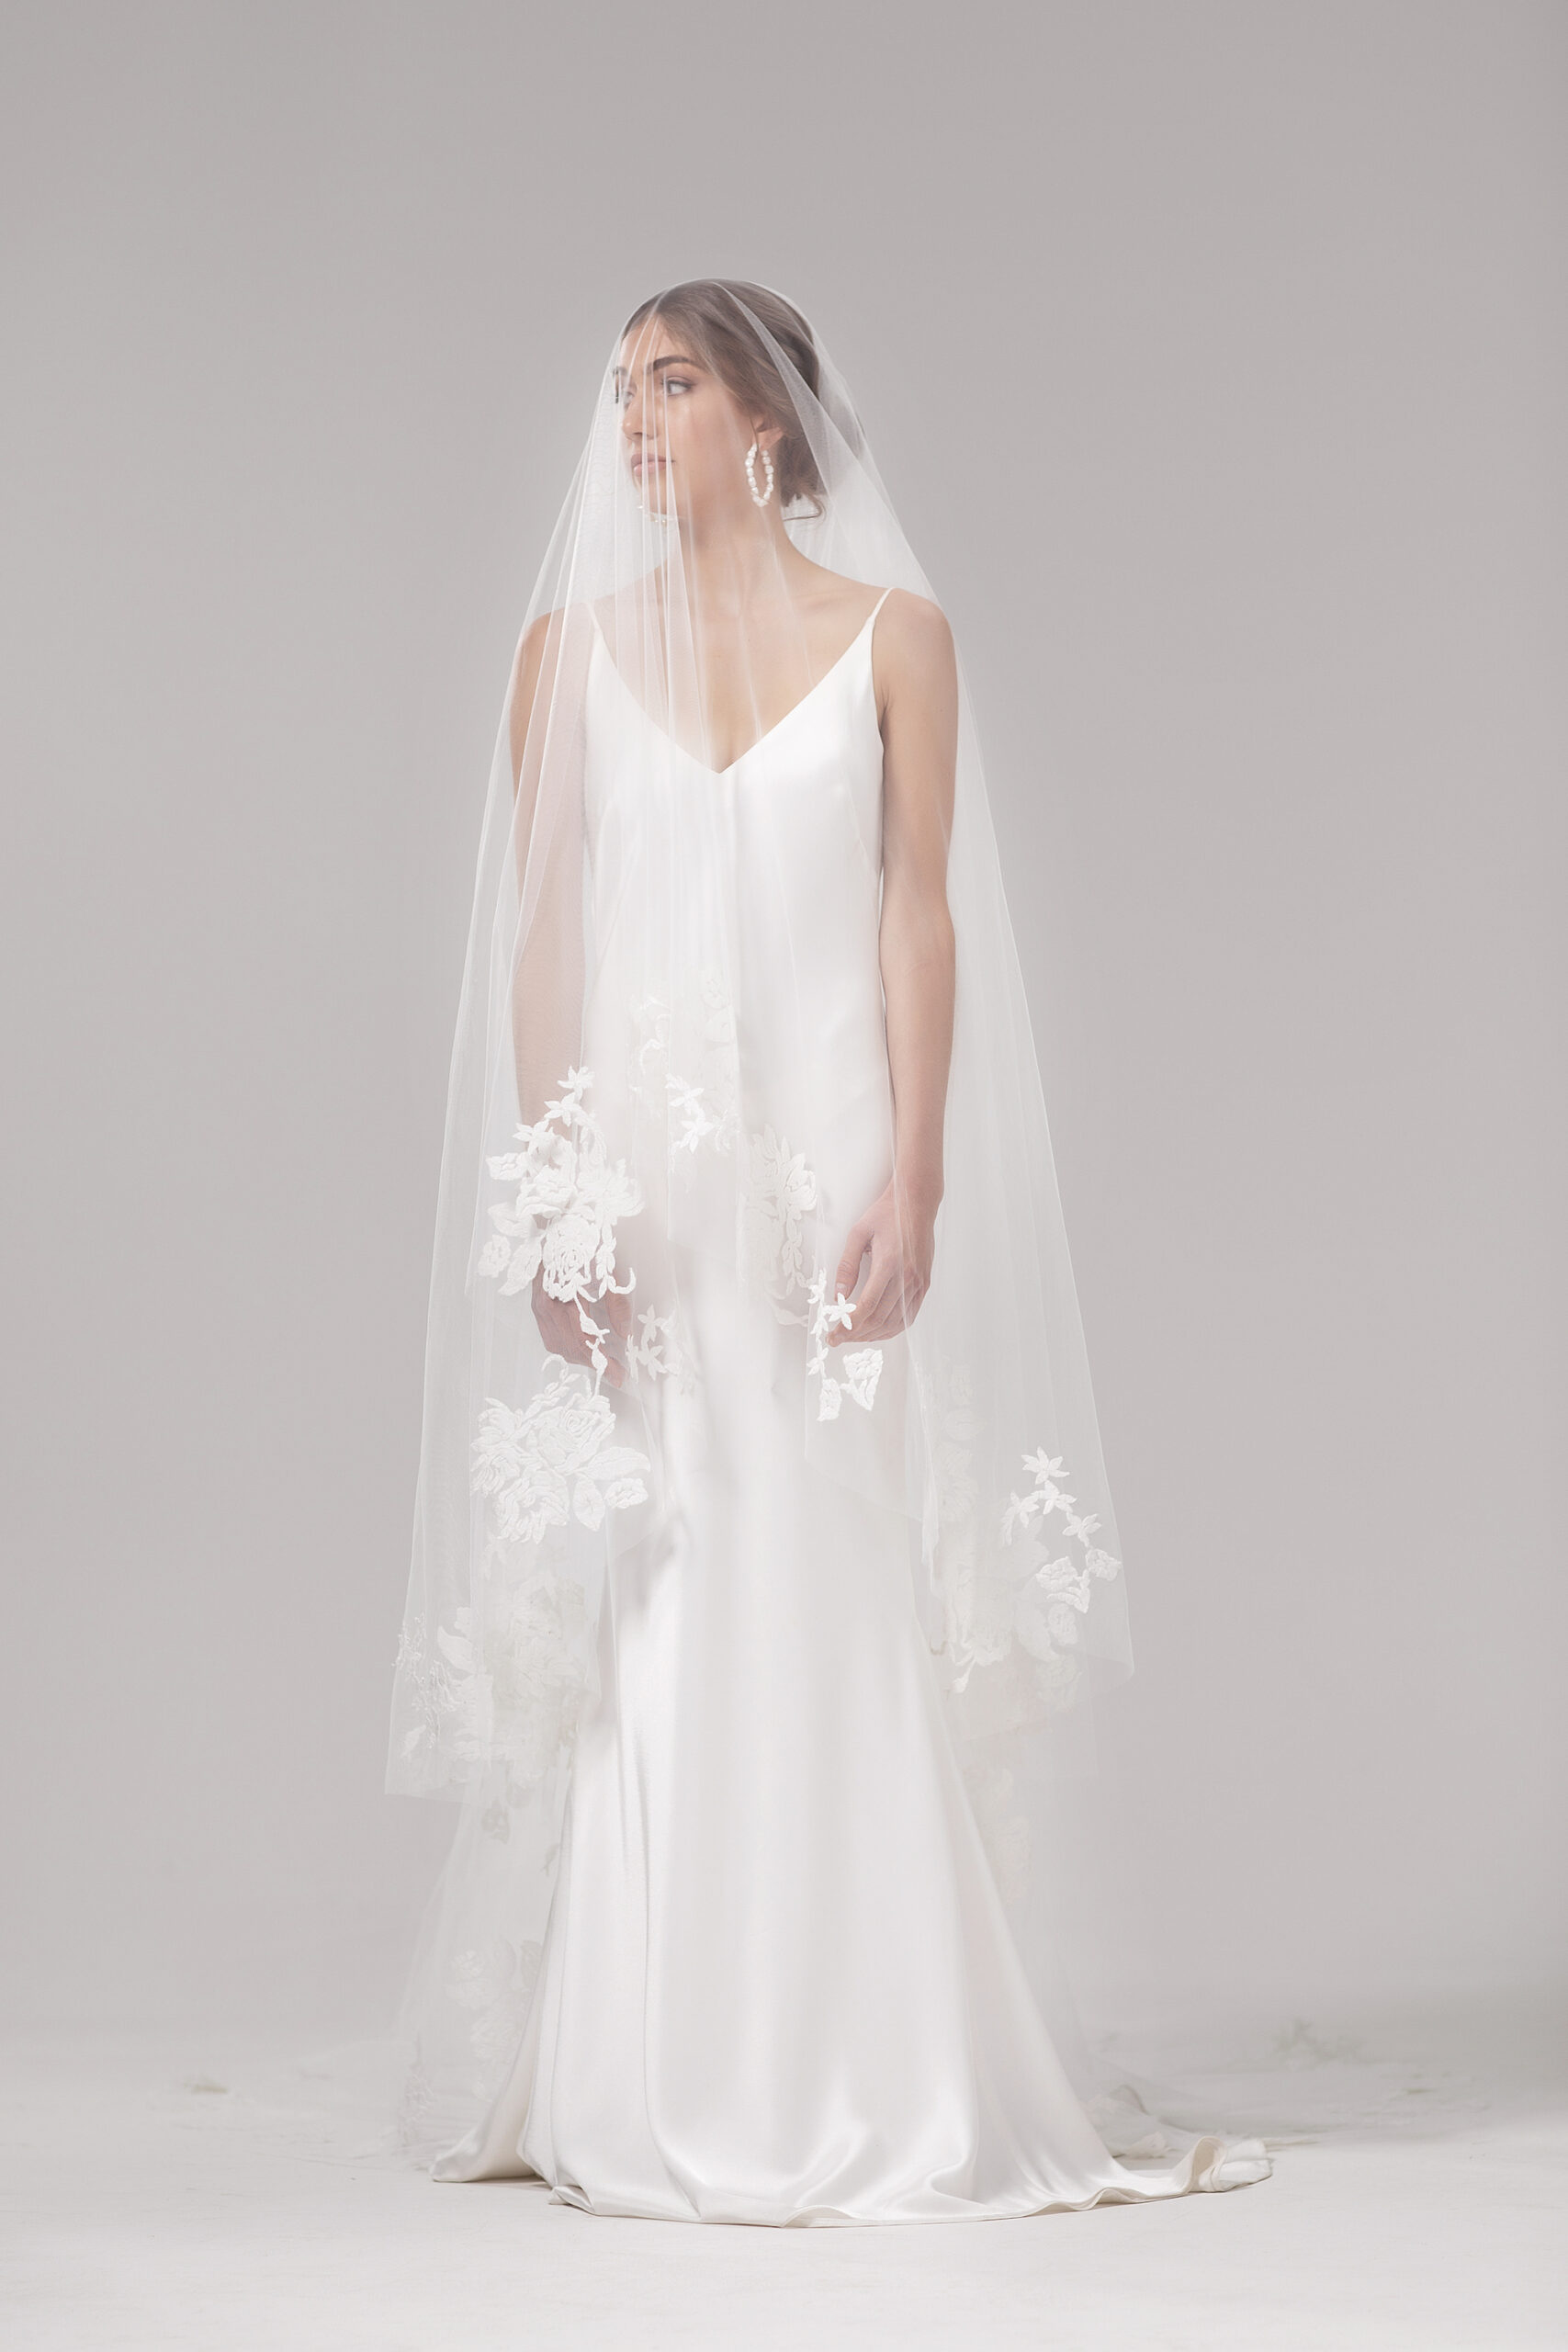 Front view of model wearing the Mayfair veil blusher style over the face. Mayfair is a two-tier 2.5m veil with delicate floral embroidery around the edge.